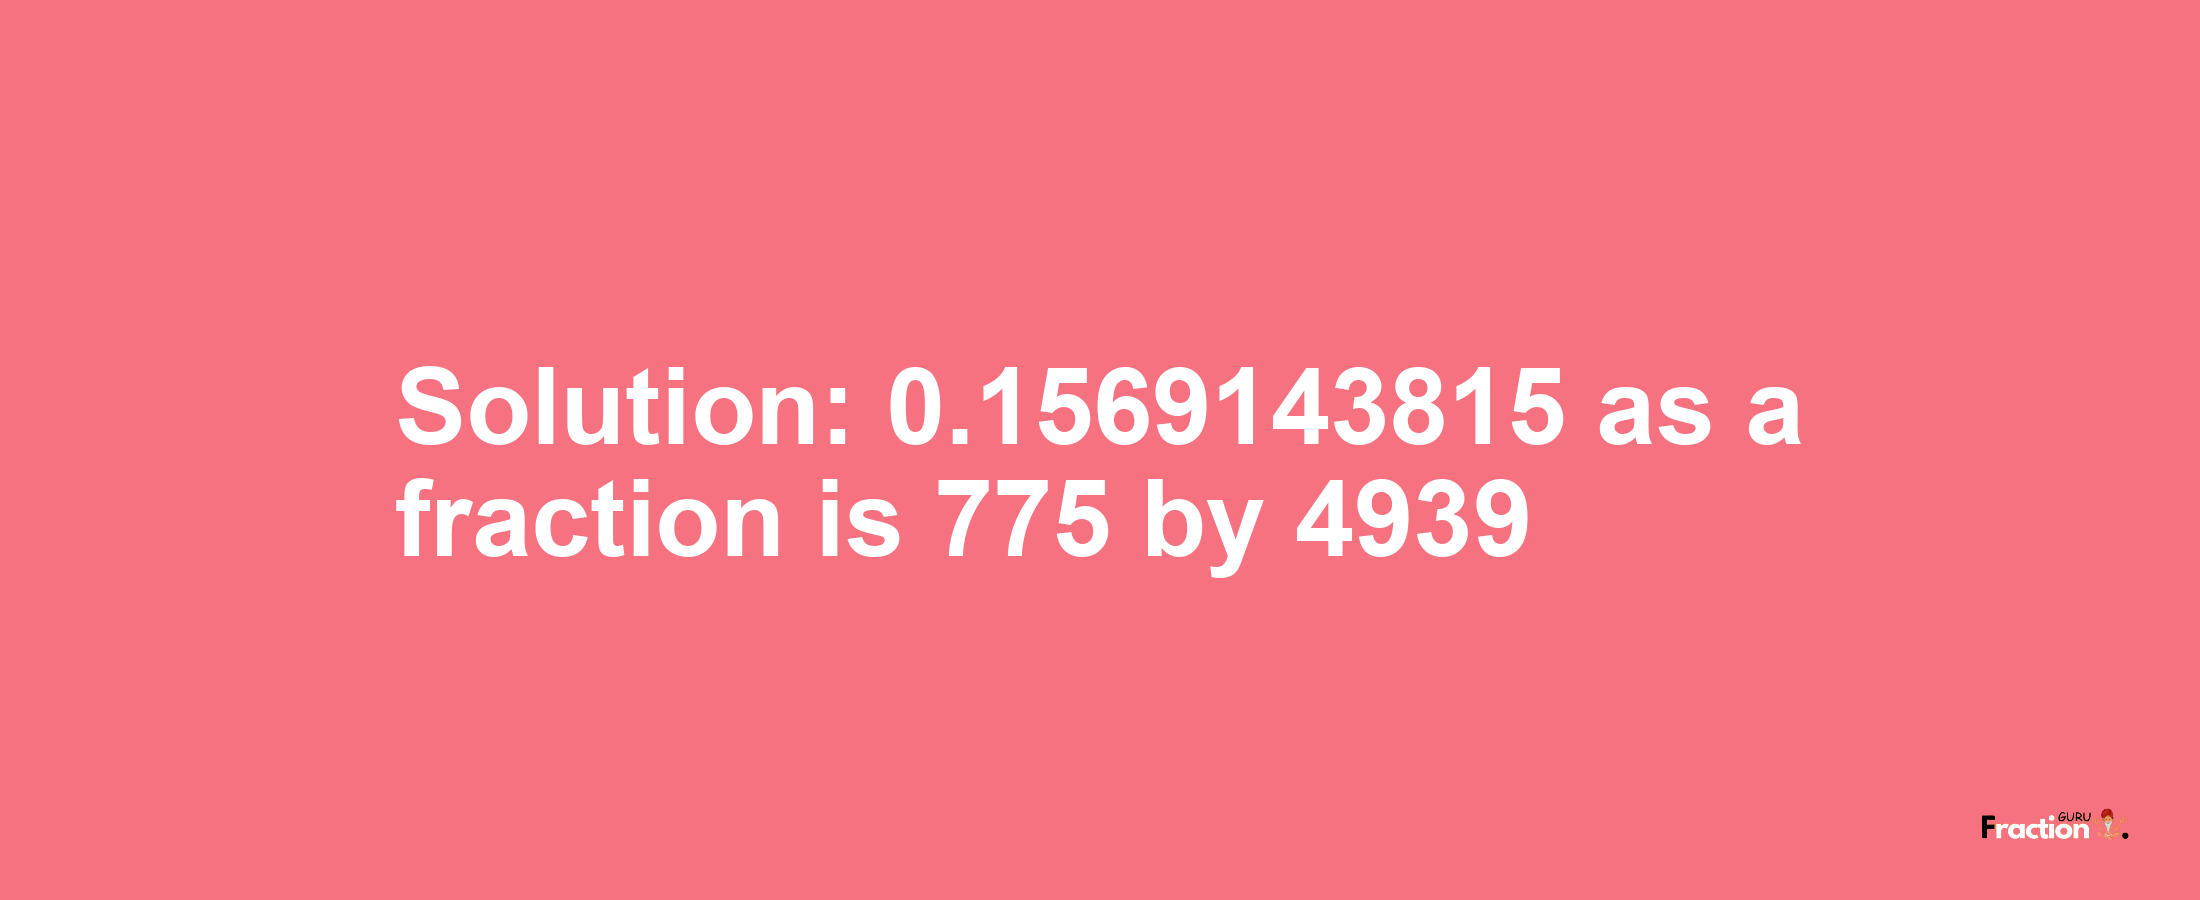 Solution:0.1569143815 as a fraction is 775/4939